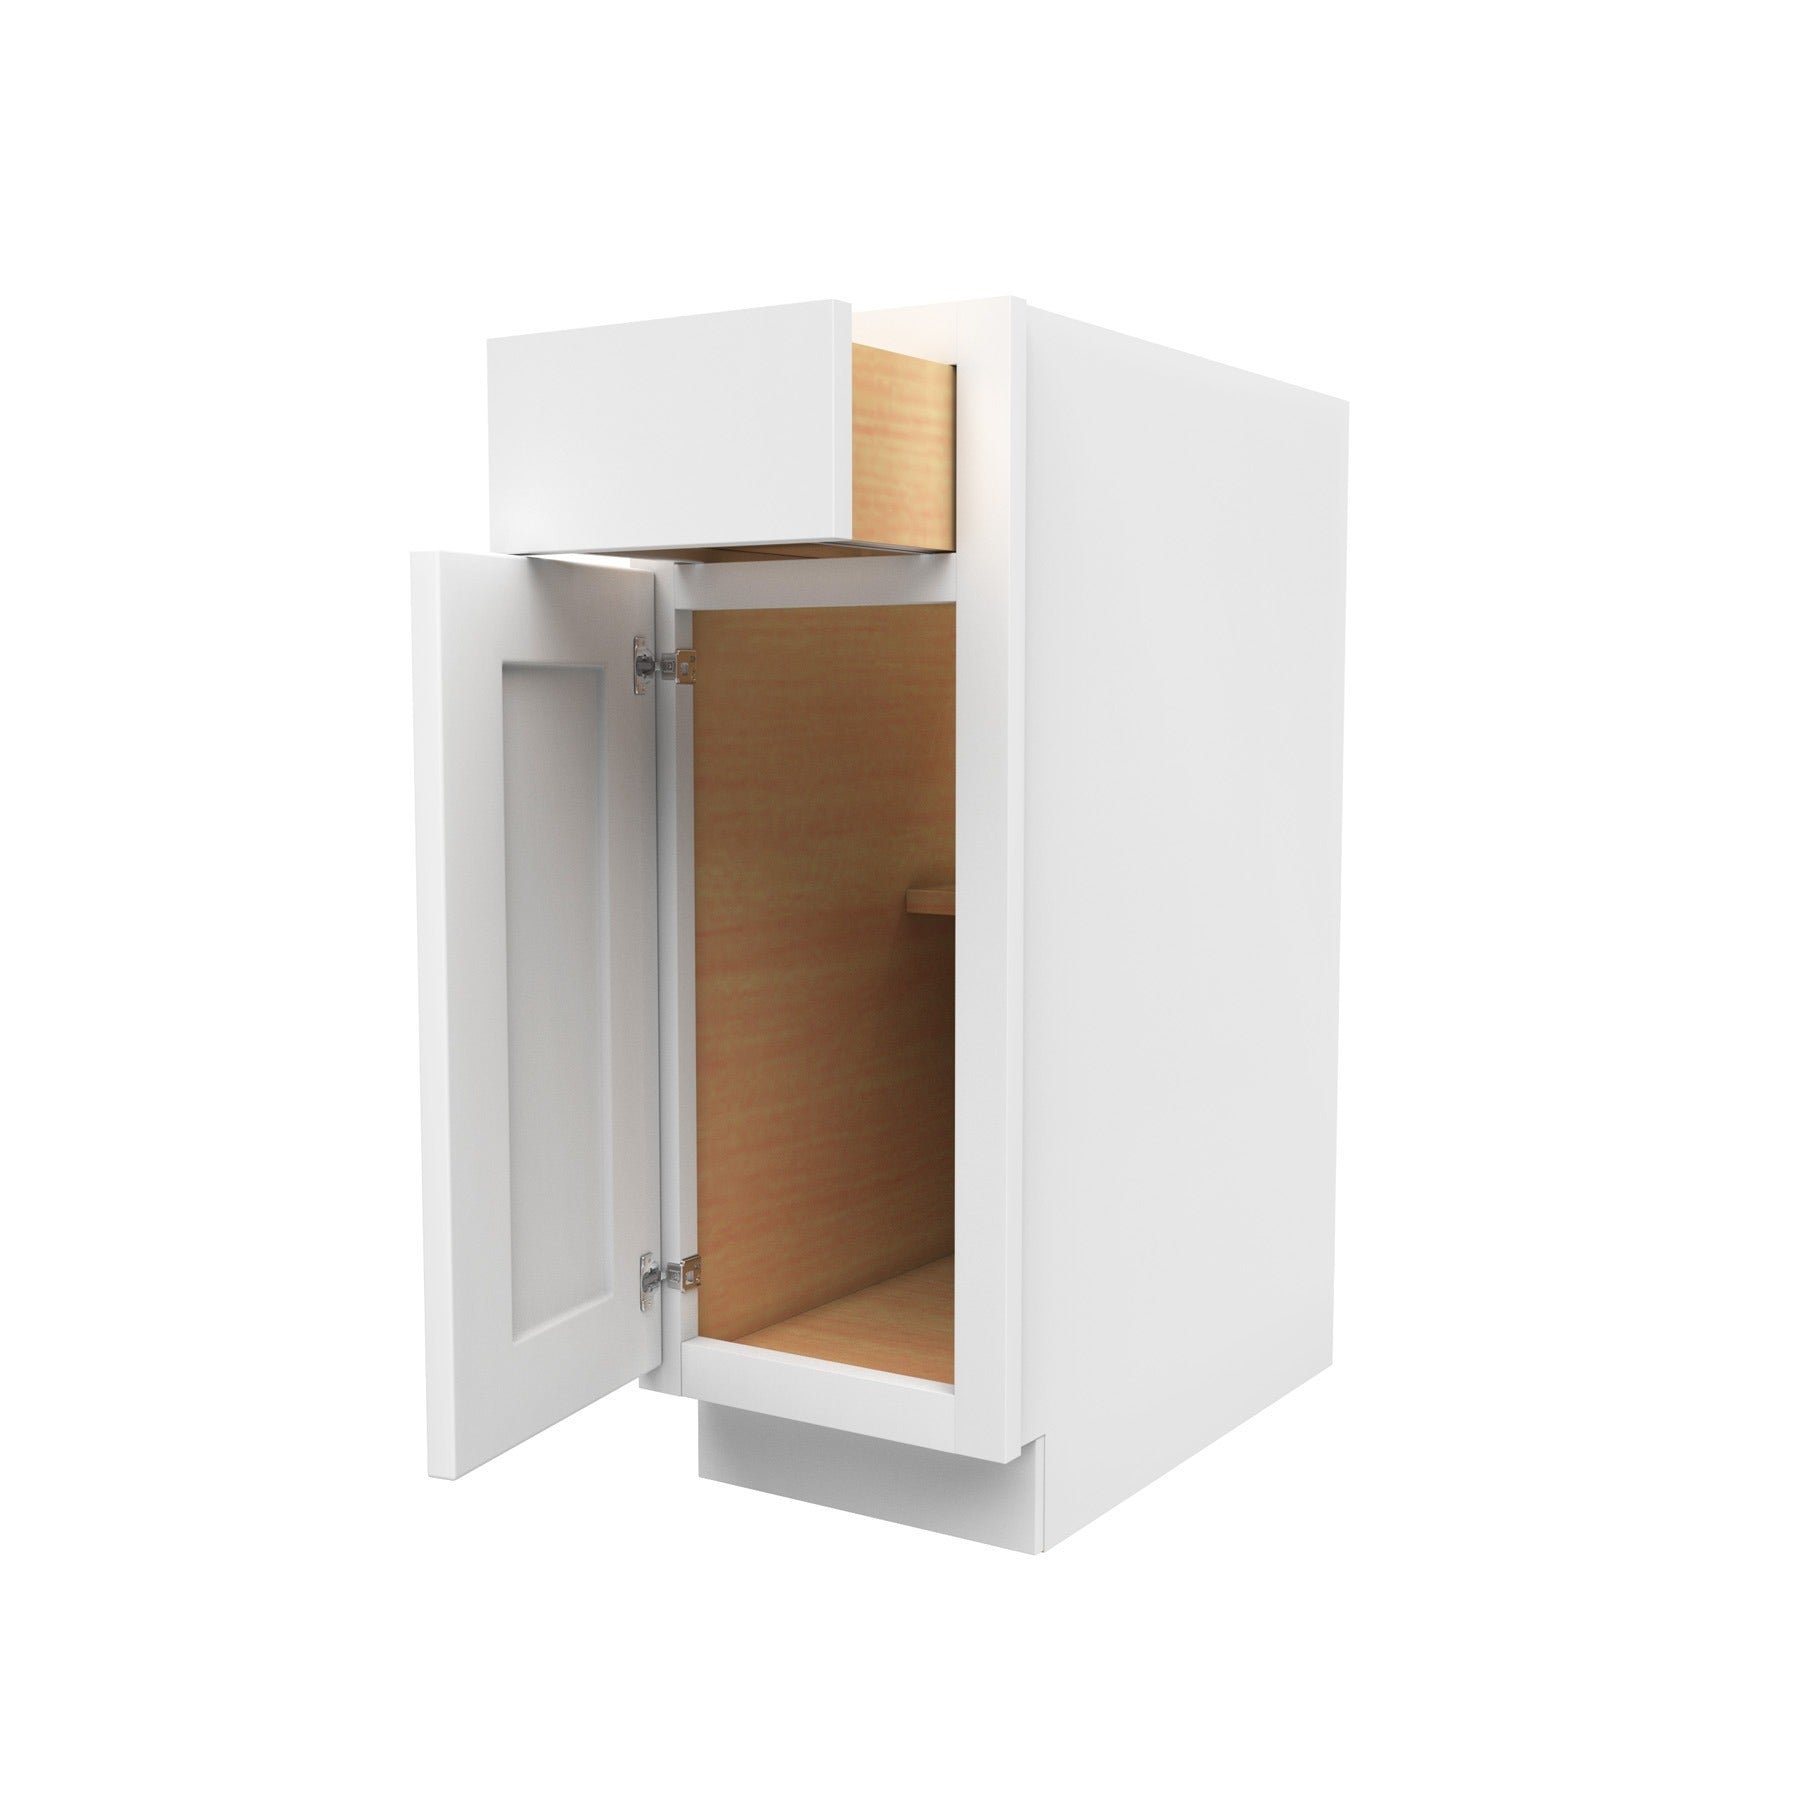 12 Inch Wide Accessible ADA - Single Door Base Cabinet - Luxor White Shaker - Ready To Assemble, 12"W x 32.5"H x 24"D